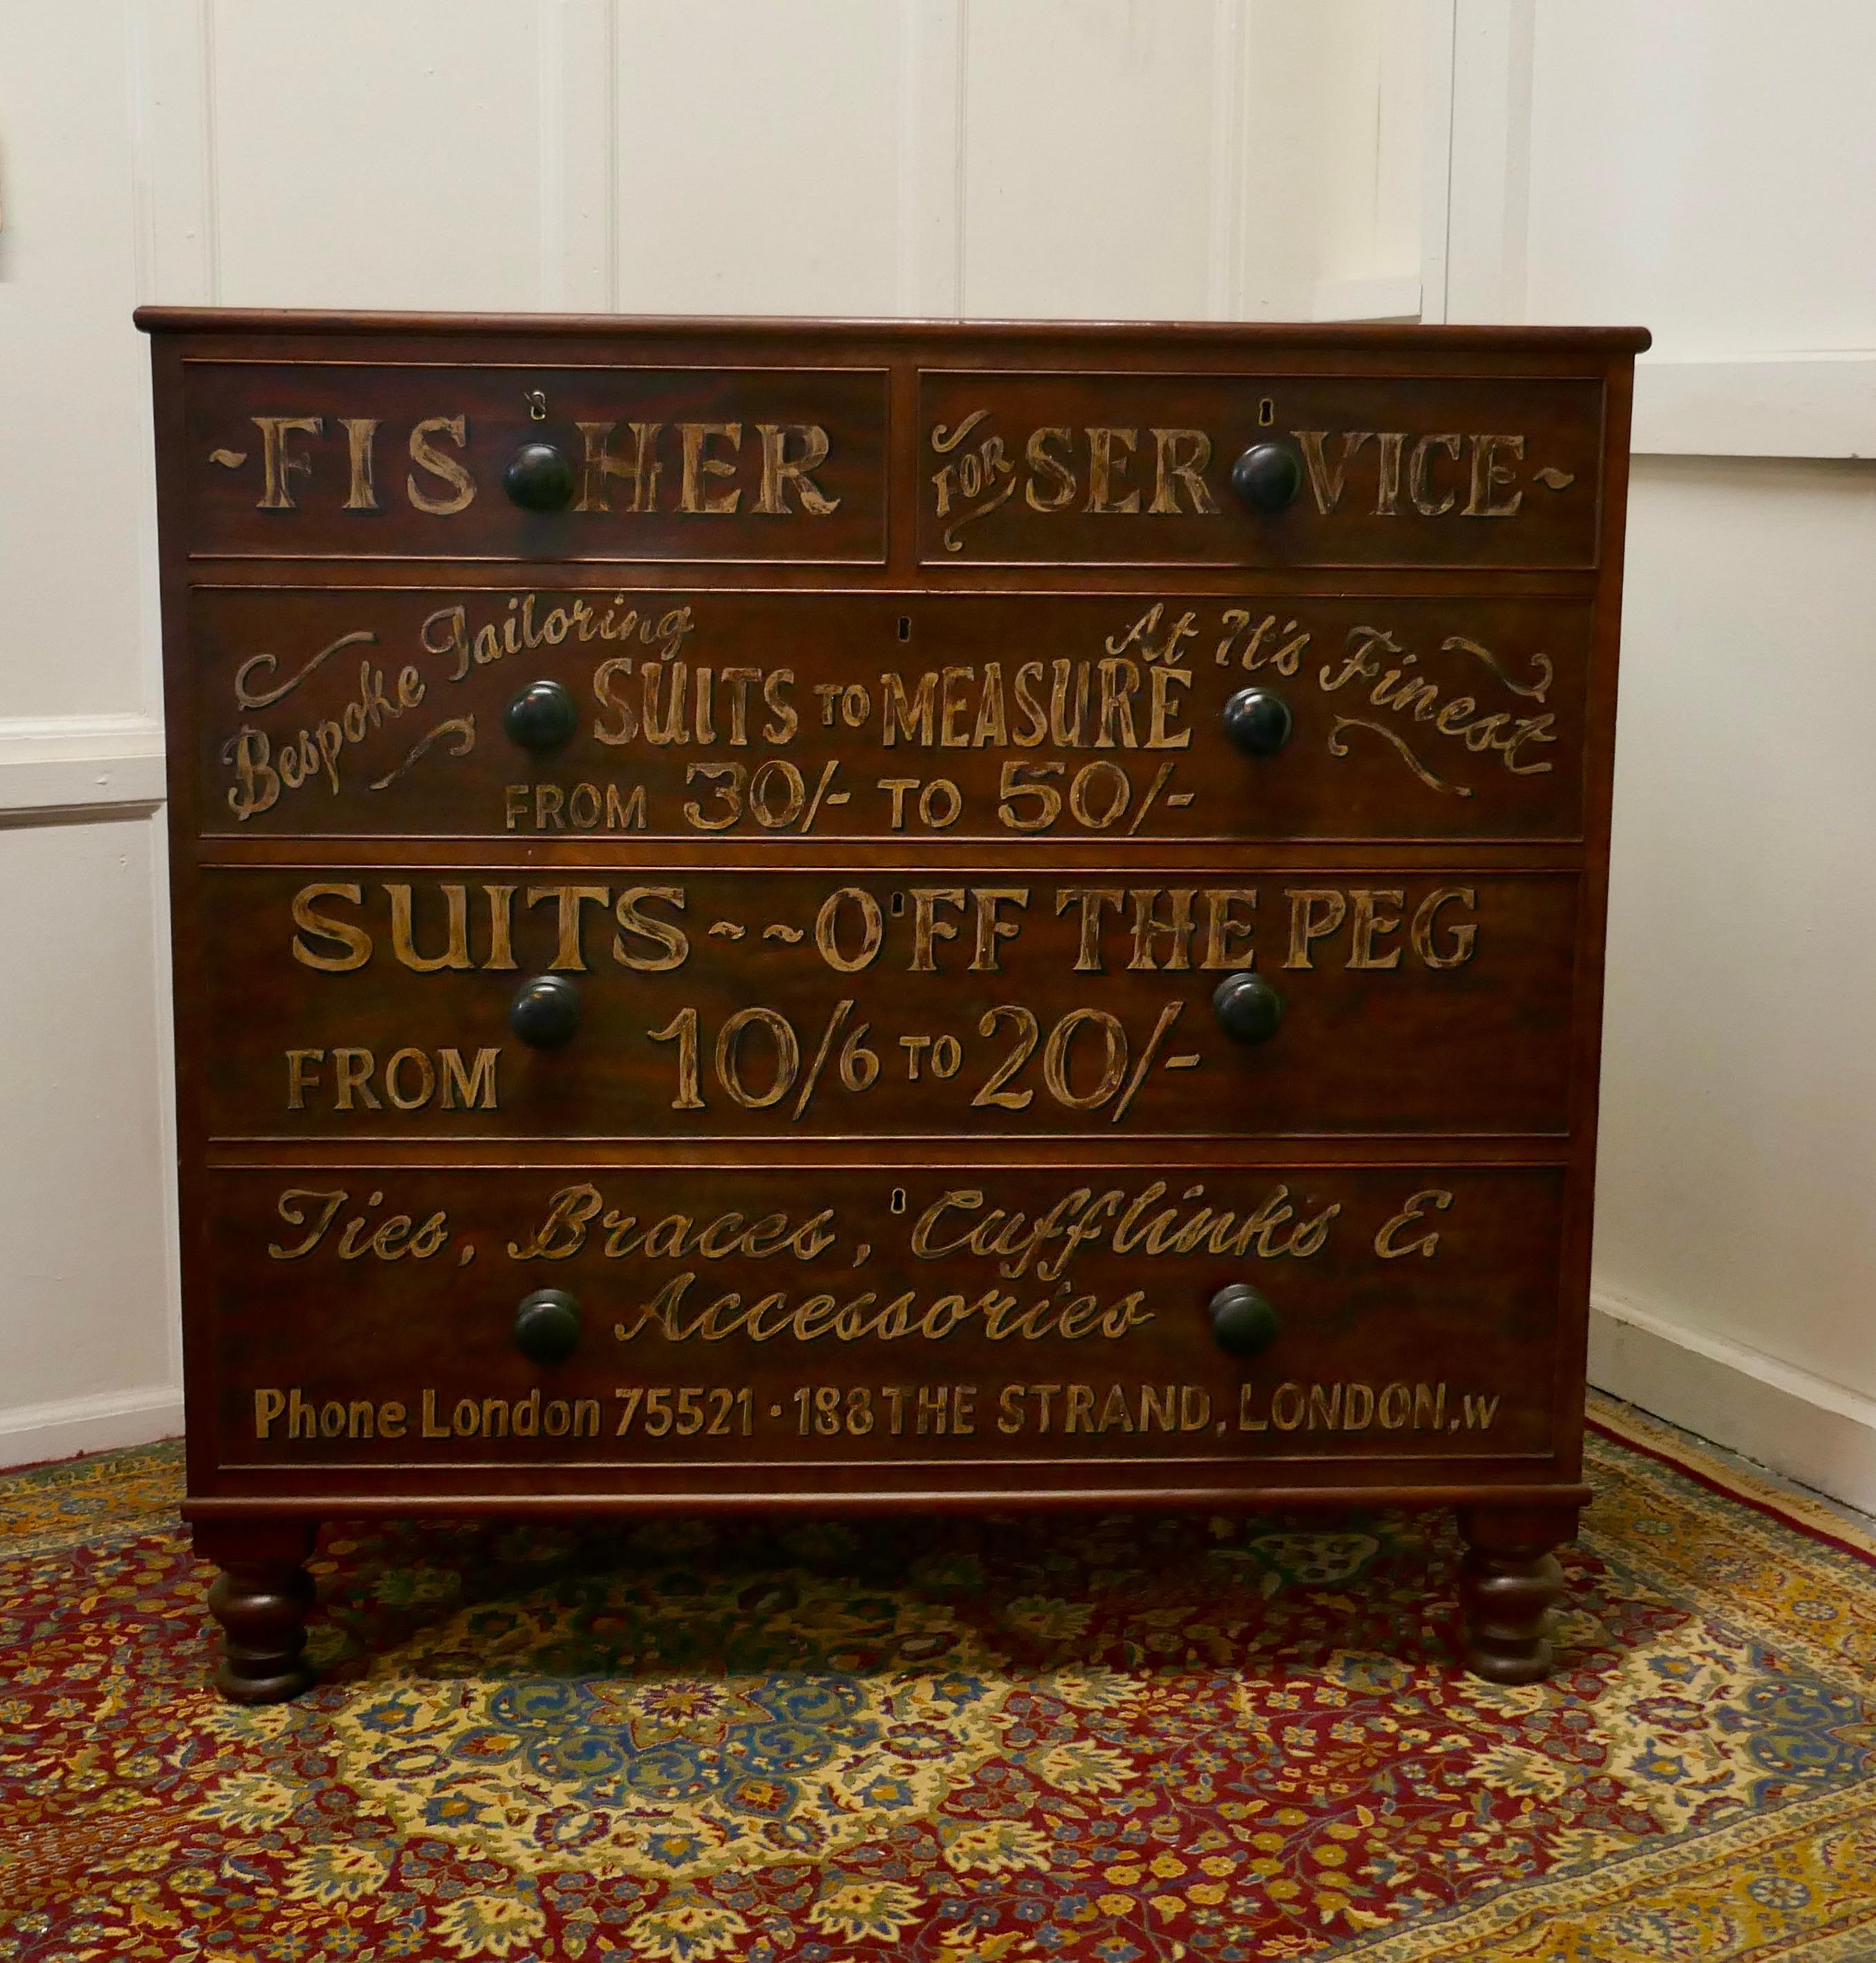 Victorian mahogany sign painted chest of drawers, fisher gentleman’s outfitter shop display

This is a real Gem, the chest of drawers is made in mahogany and has Gold and Shadowed Lettering painted on the front advertising the wares and serviced